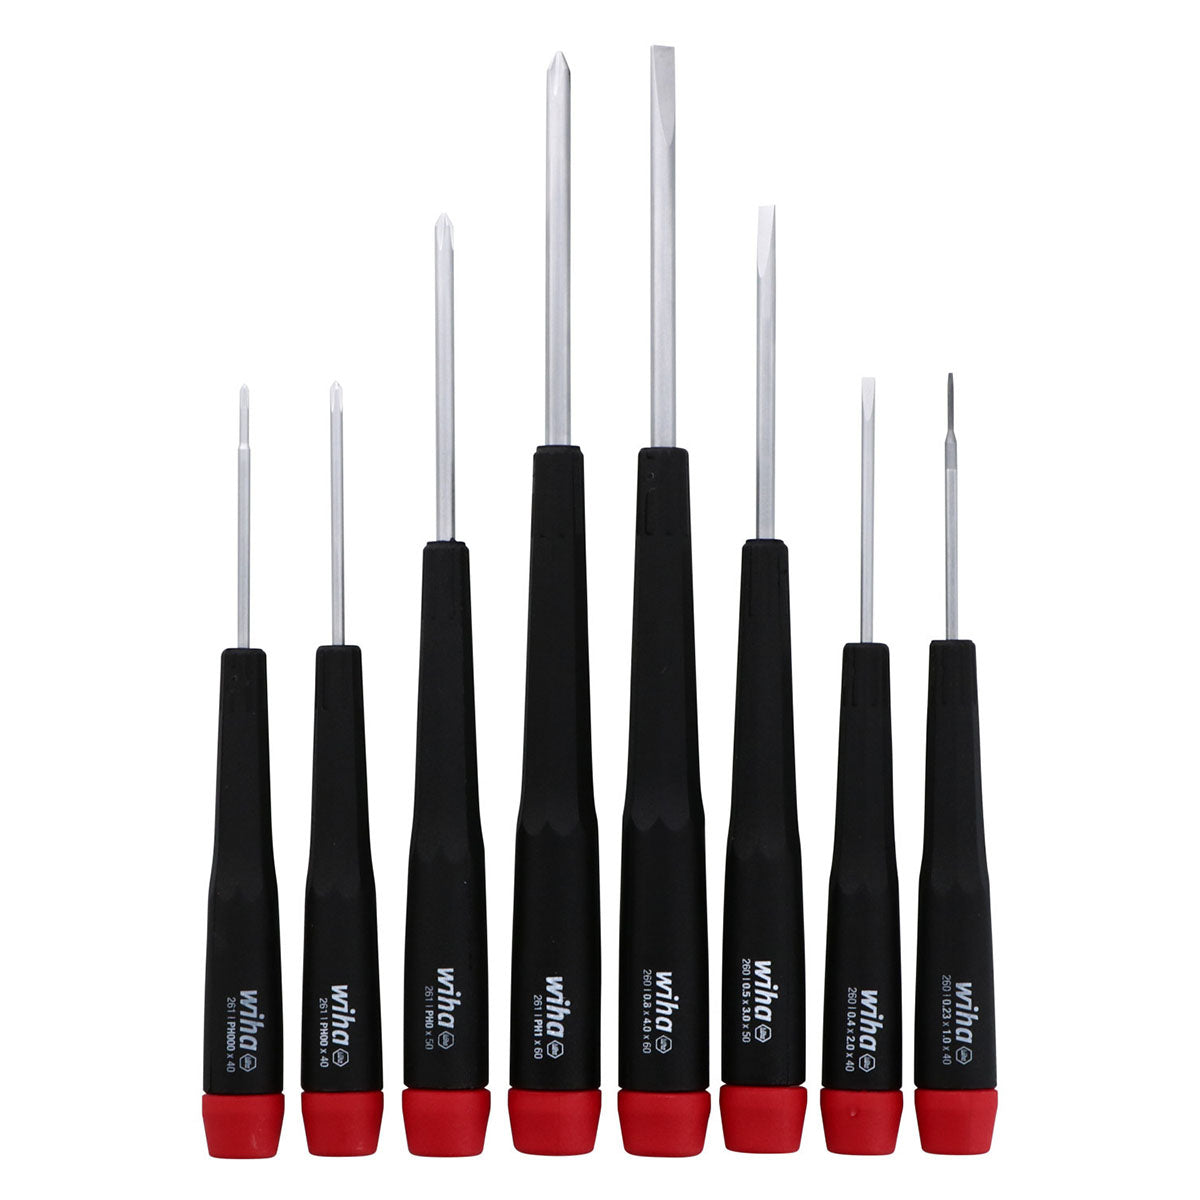 Wiha Precision Slotted And Phillips Screwdriver Set (8 Piece Set)